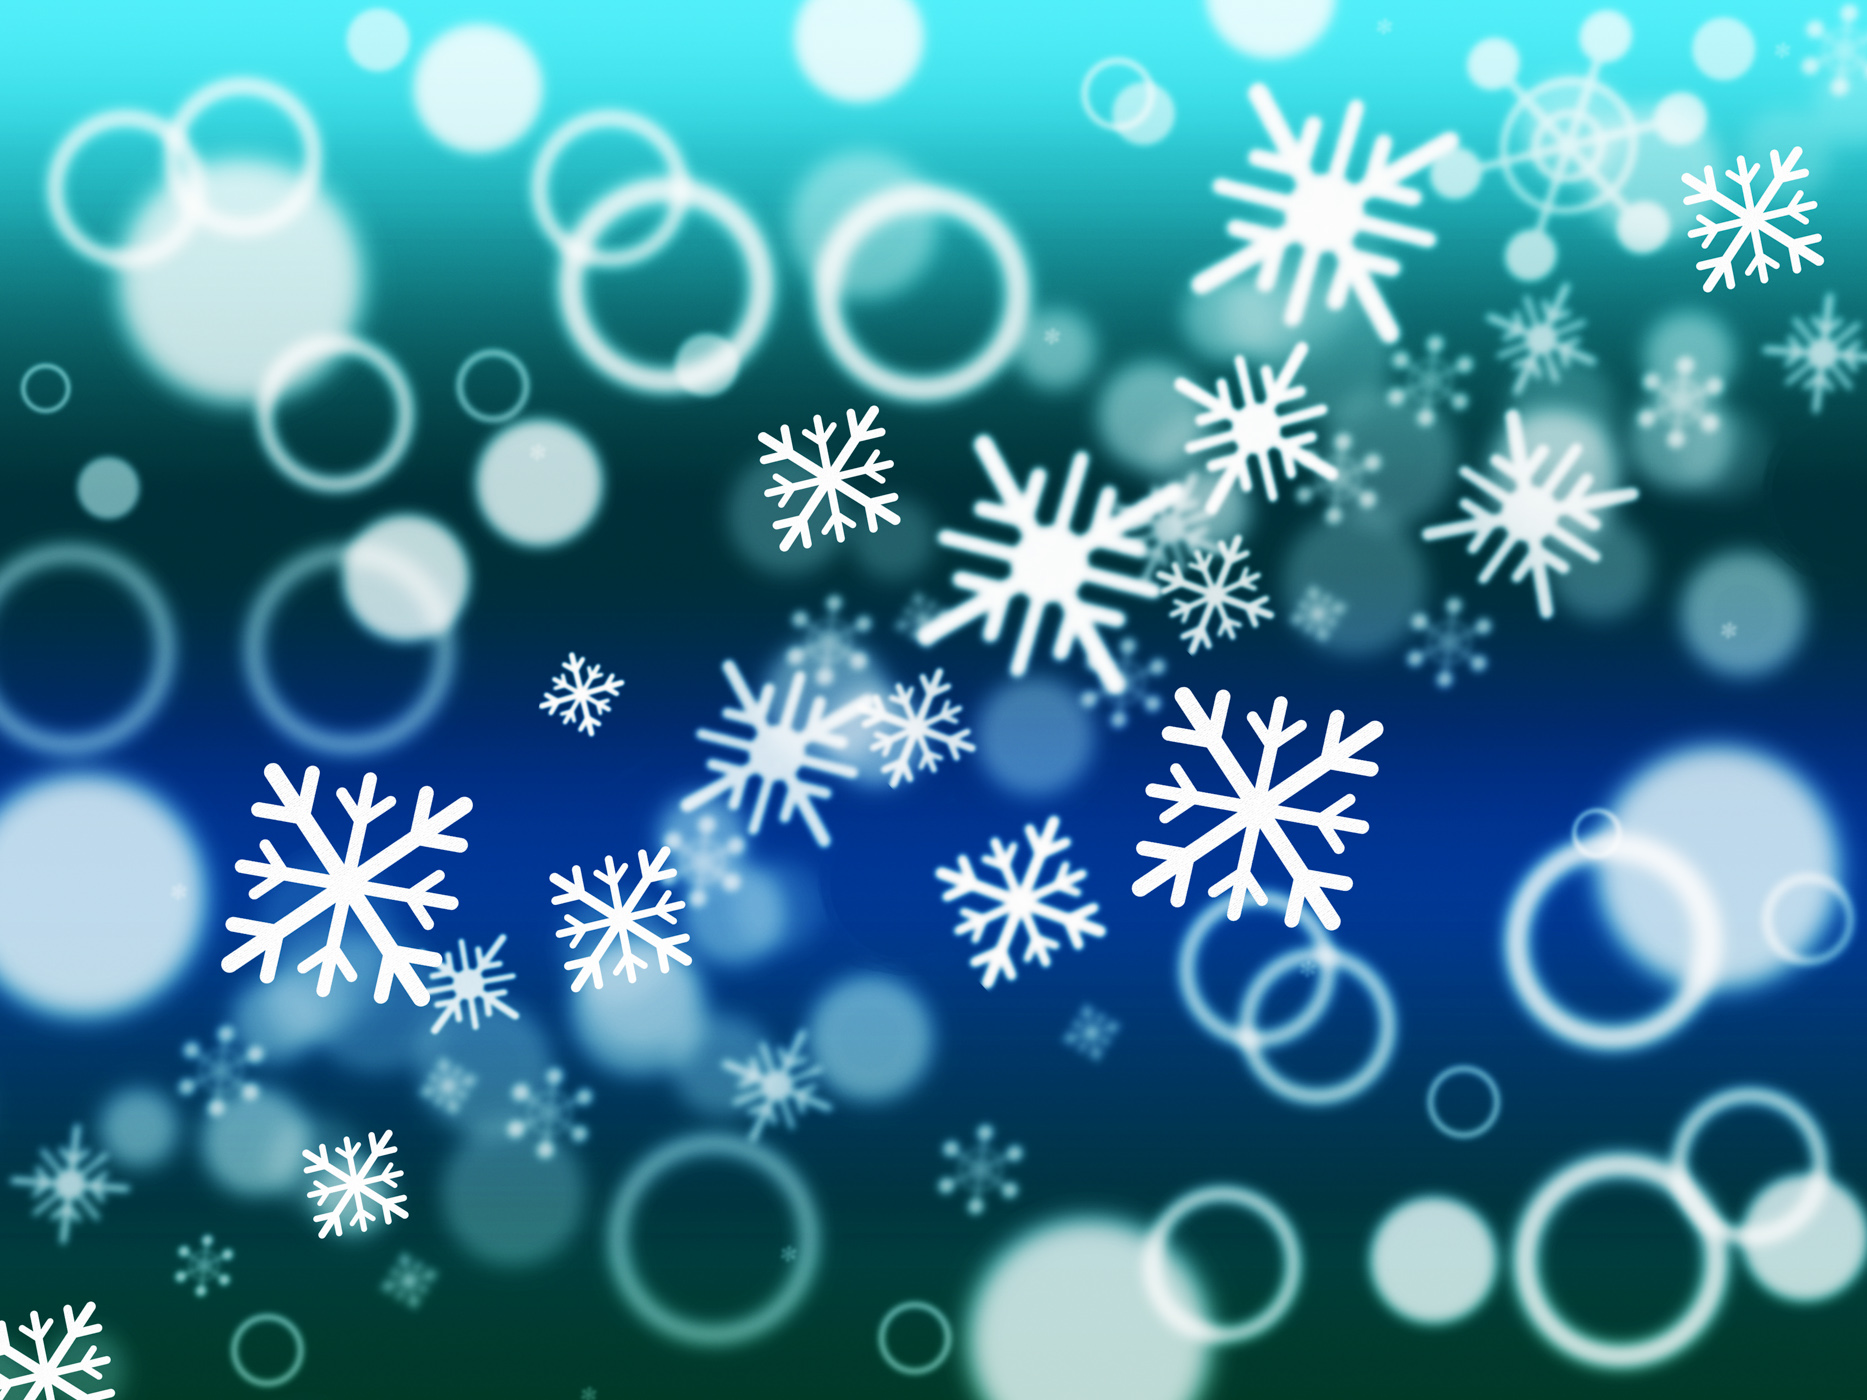 Snowflake bokeh means merry christmas and blurred photo